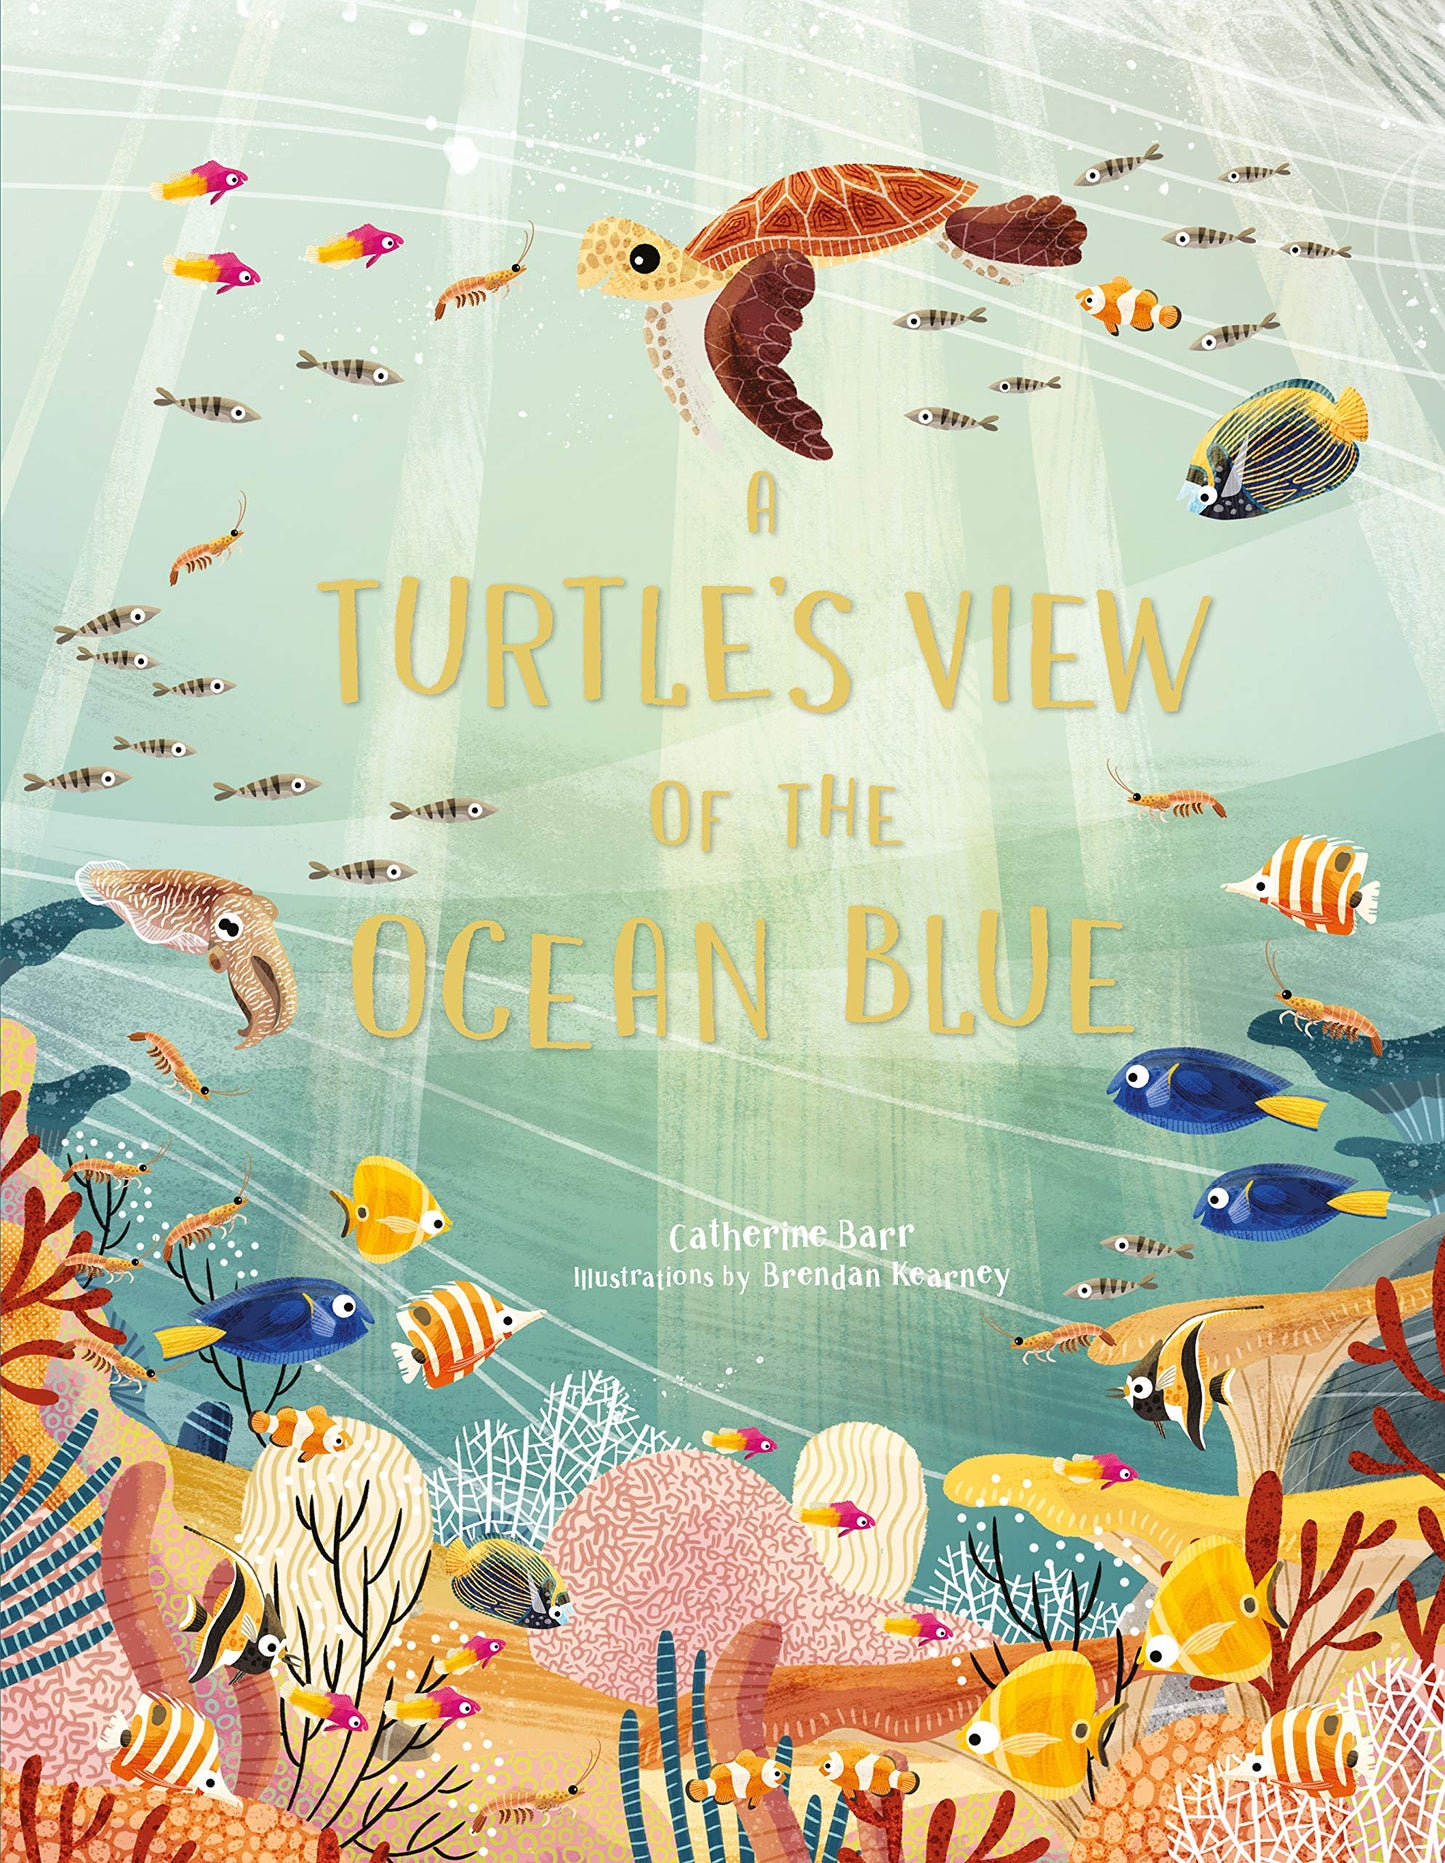 A Turtle’s View of the Ocean Blue by Catherine Barr and Brendan Kearney